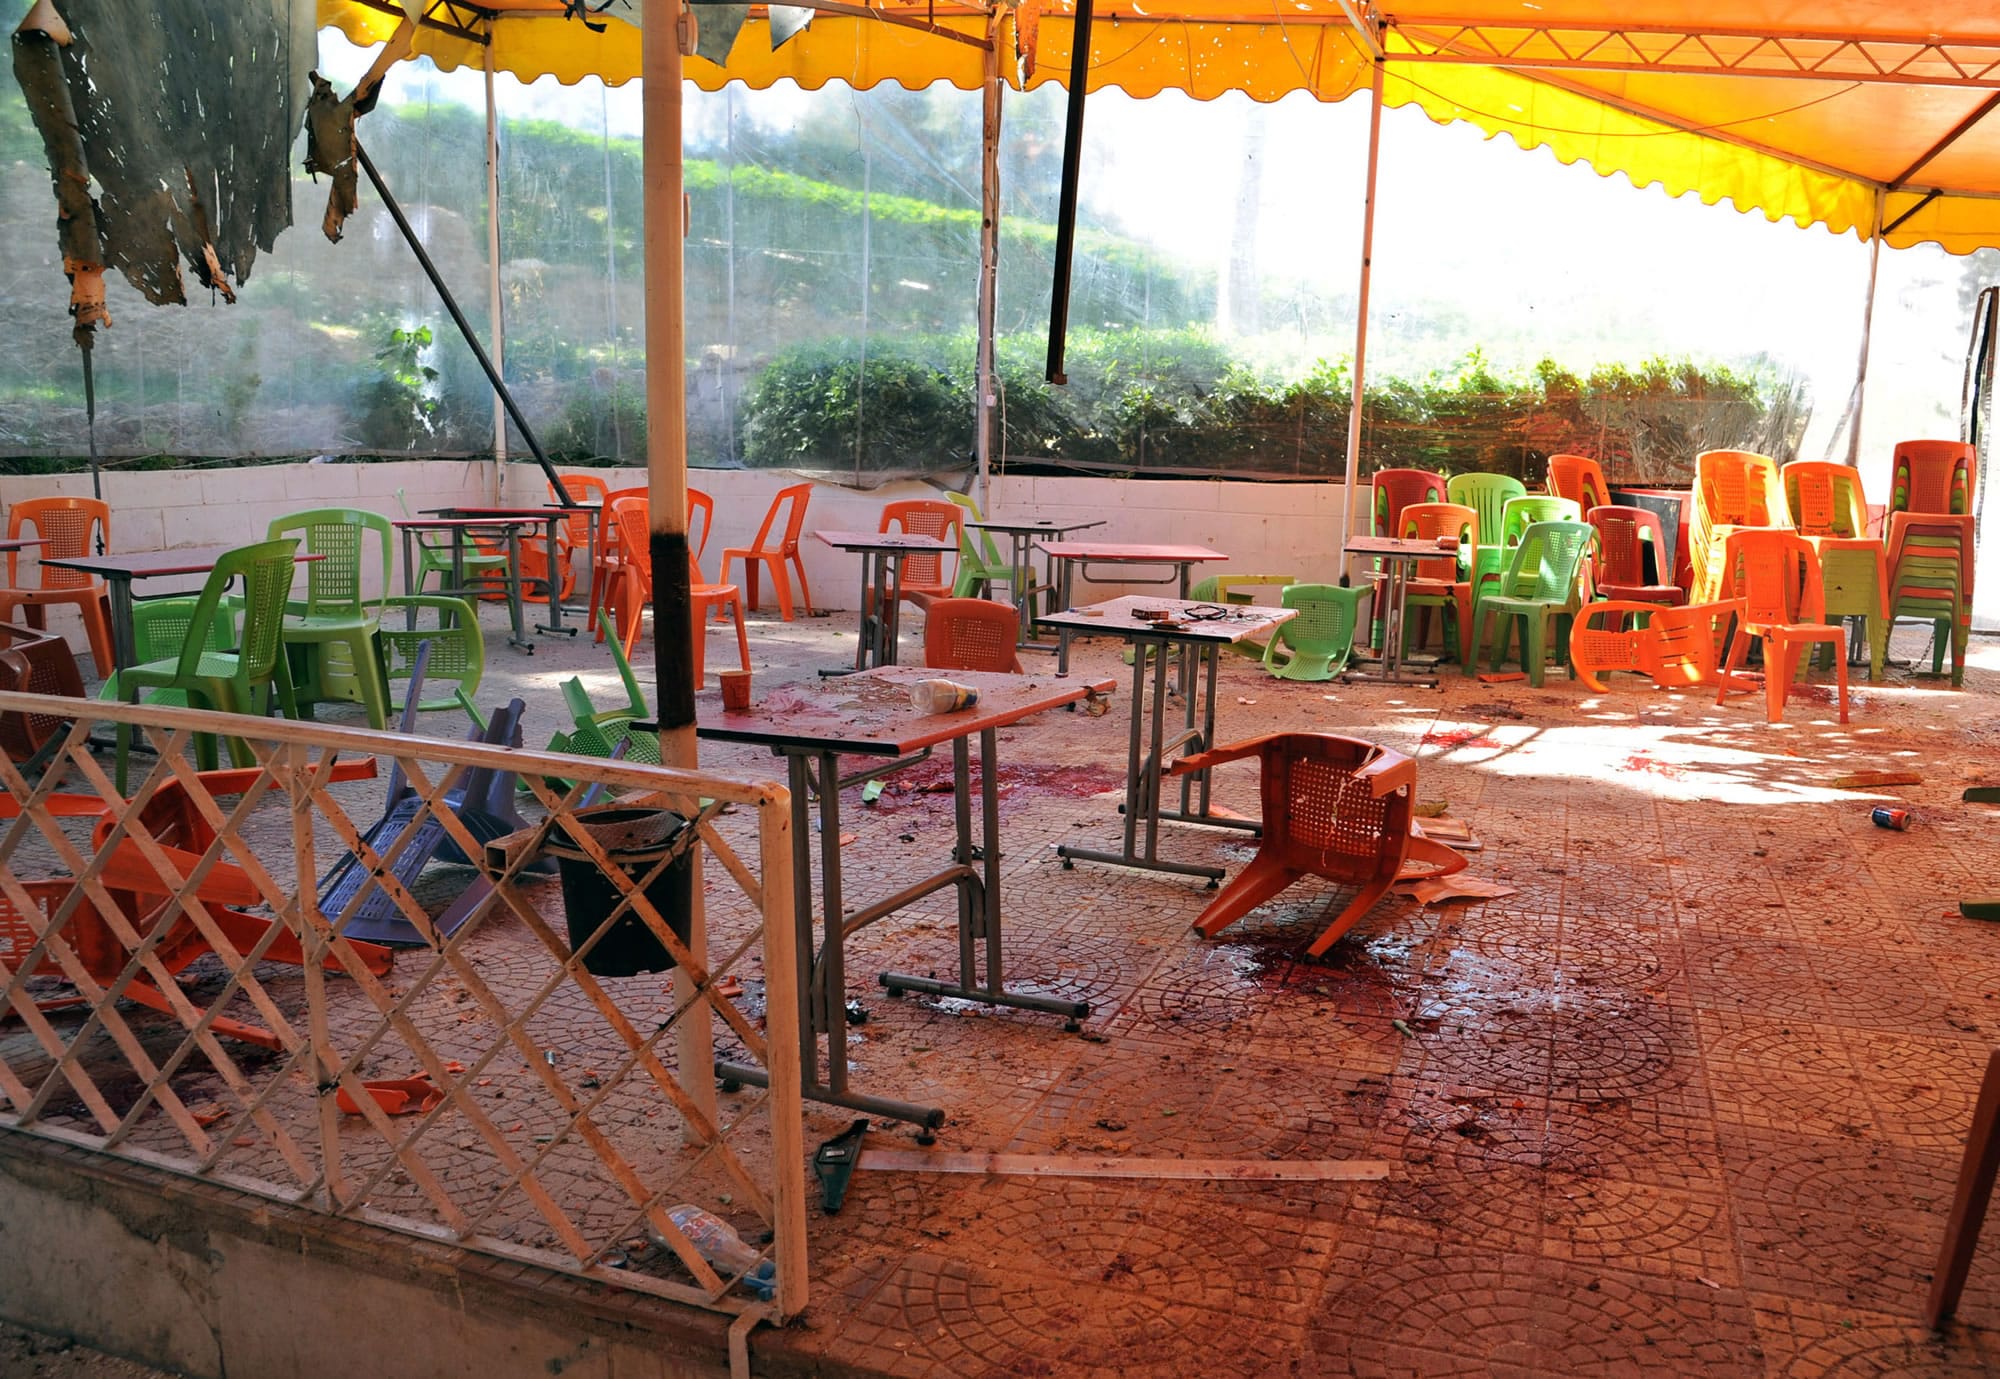 Plastic tables and chairs turned upside down are seen on the floor of the open-air cafeteria at Damascus University in the central Baramkeh district in Damascus, Syria, on Thursday.